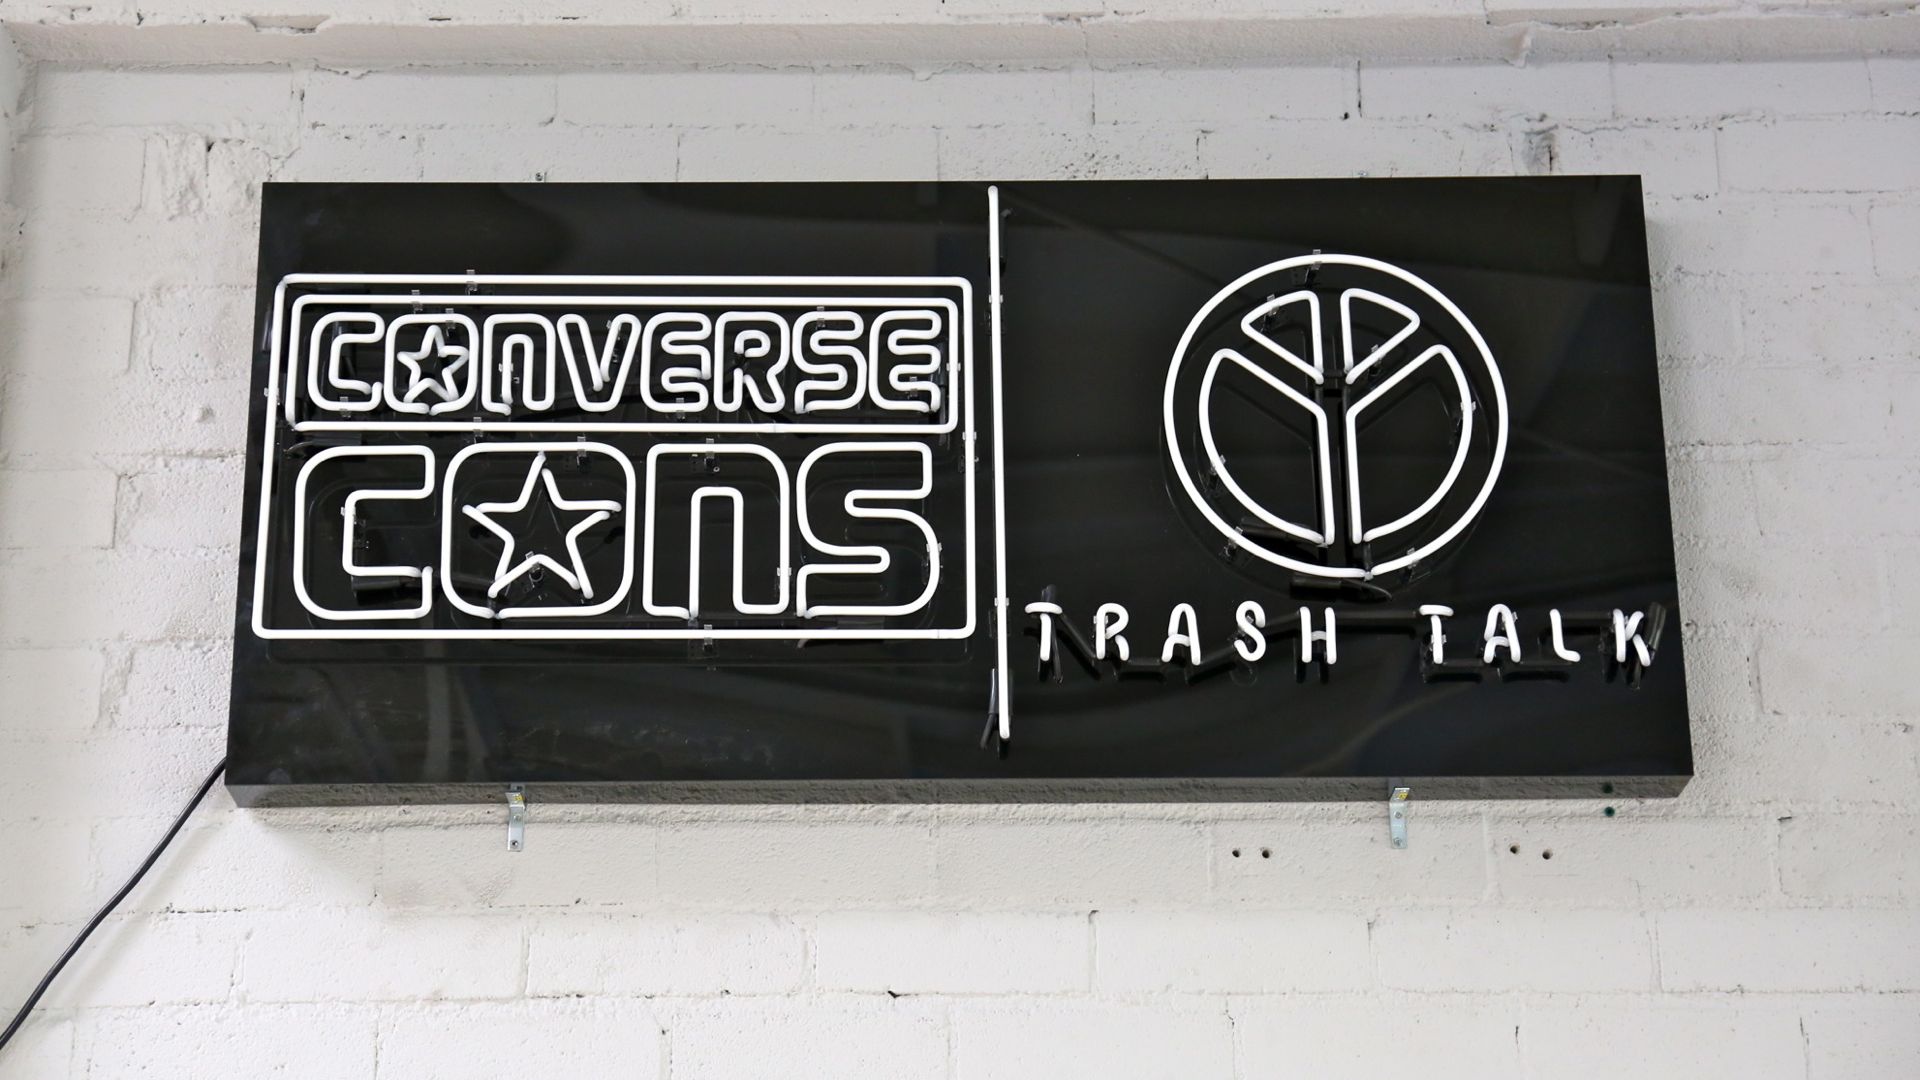 FLOOD - Trash Talk x Converse Pop-Up: Skaters and Sneakers Take